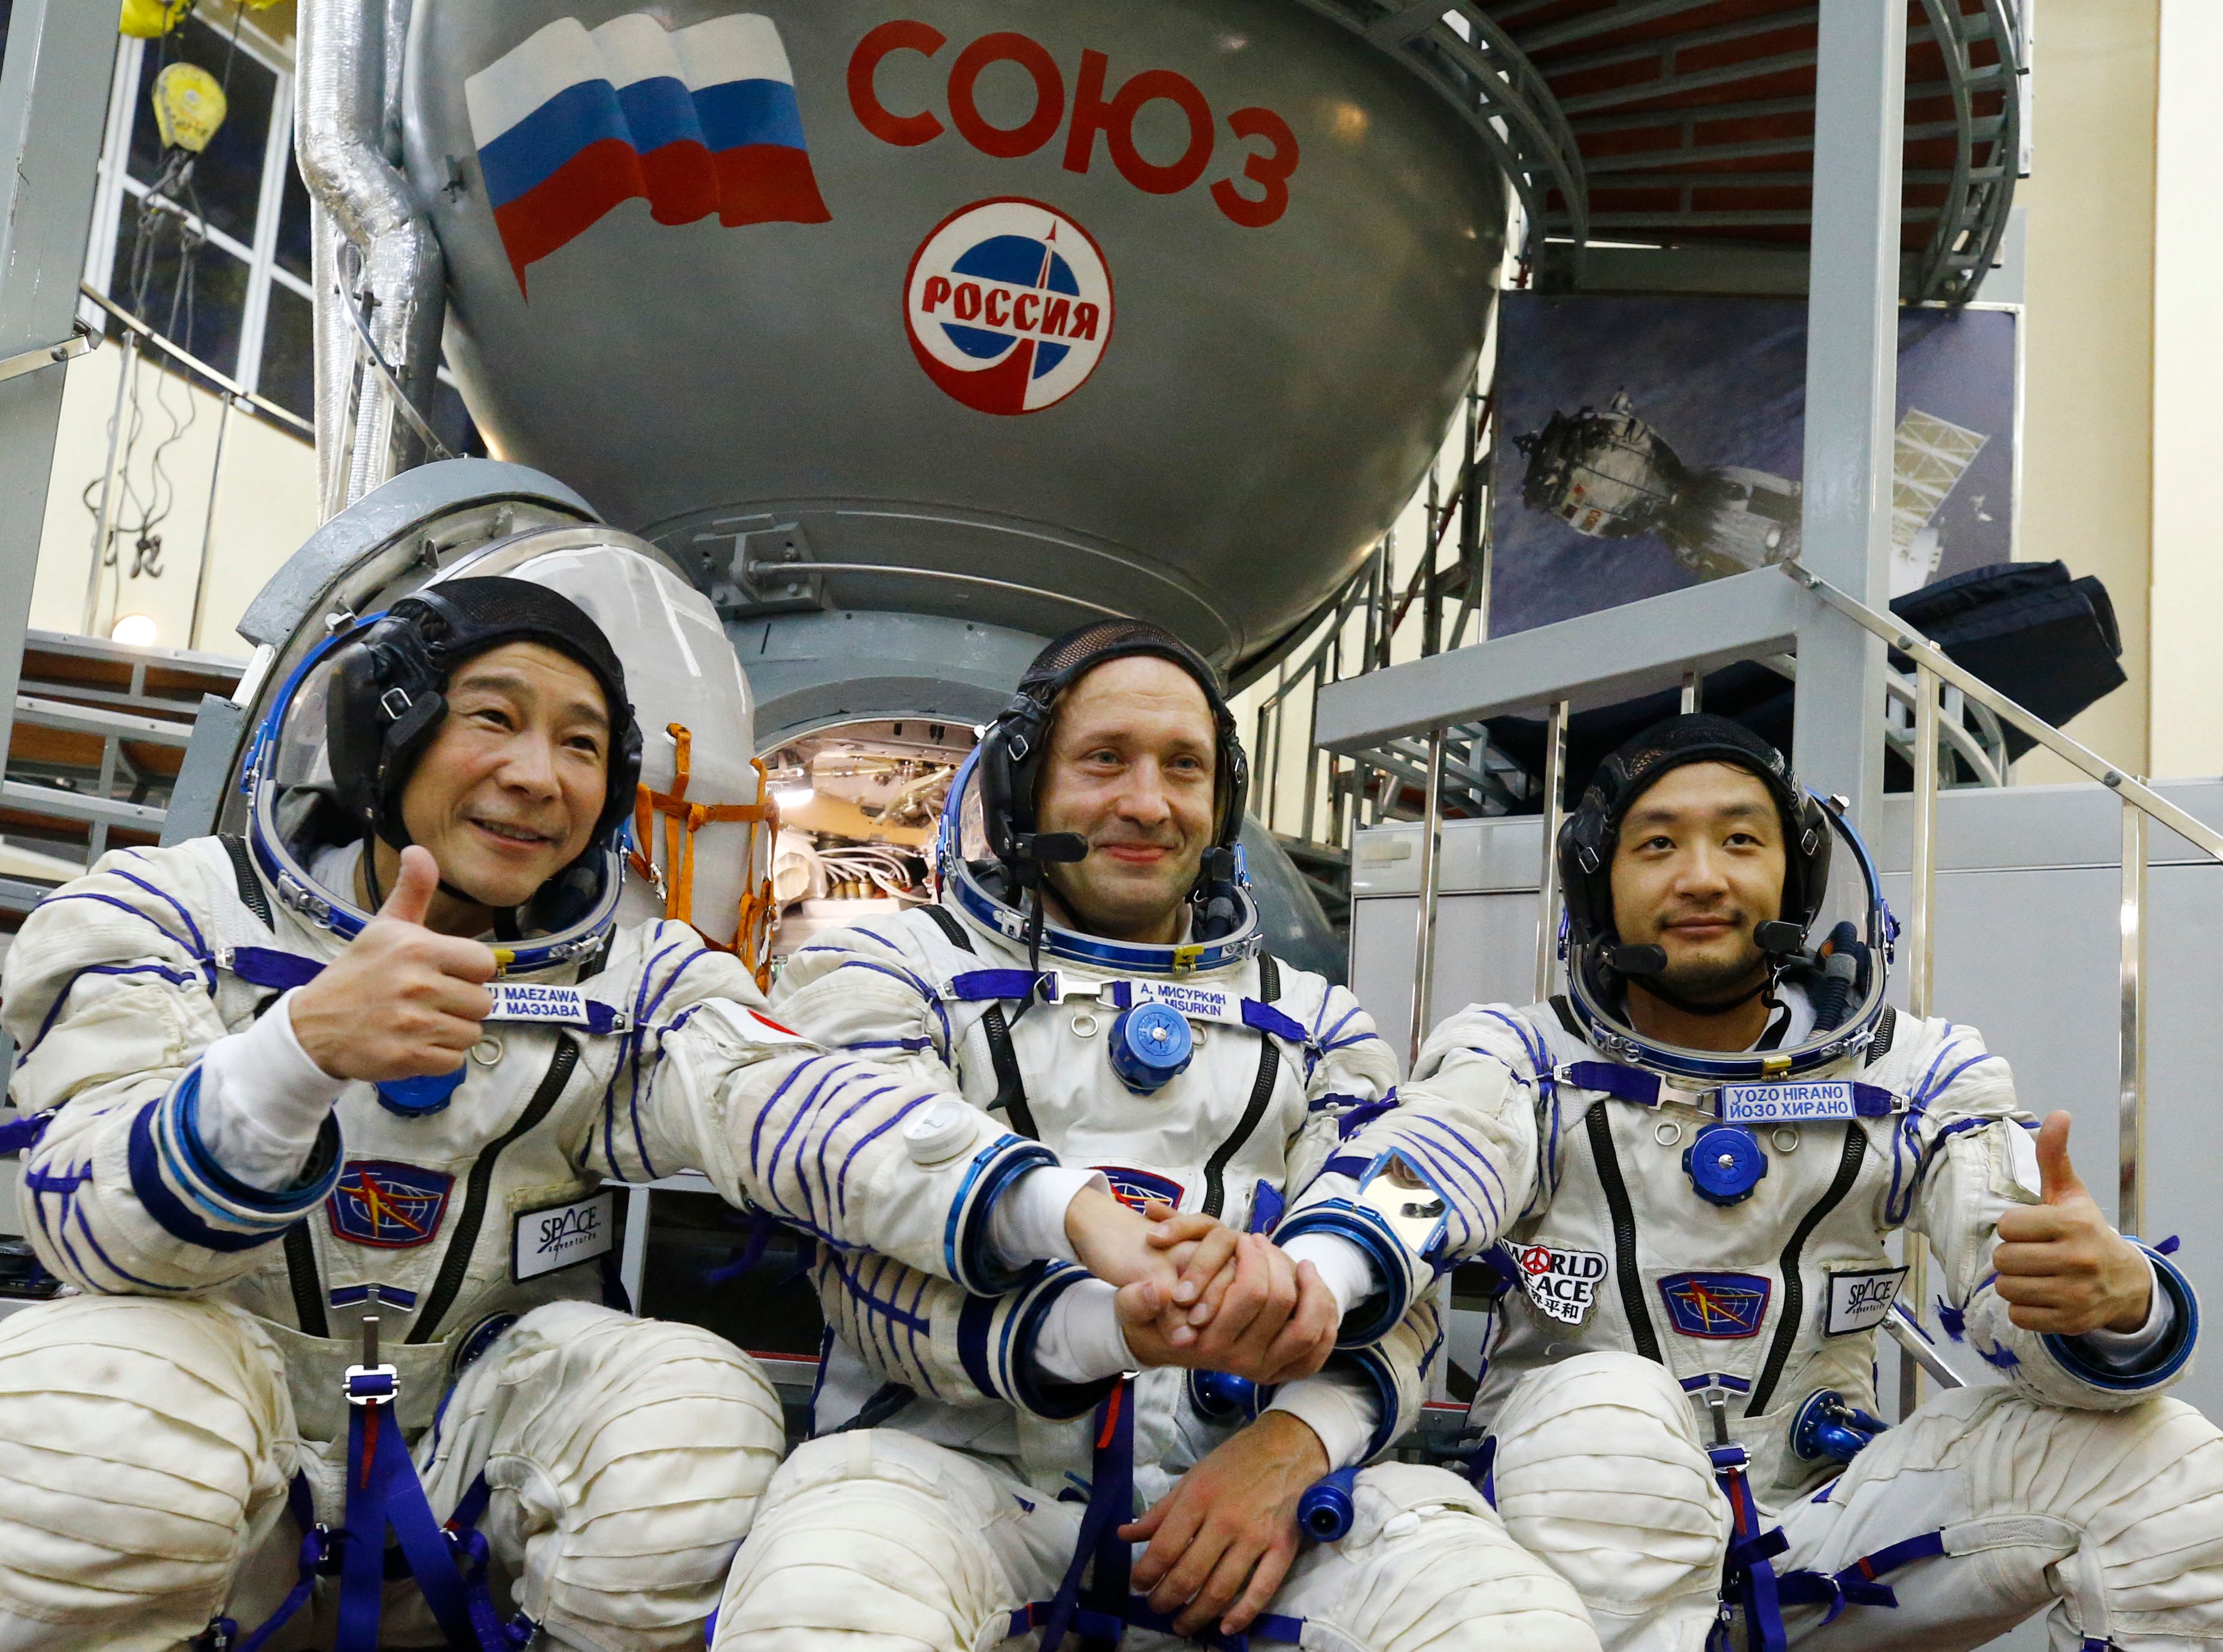 Russian cosmonaut Alexander Misurkin (C) and space flight participants Japanese billionaire Yusaku Maezawa (L) and his assistant Yozo Hirano attend a training ahead of the expedition to the ISS